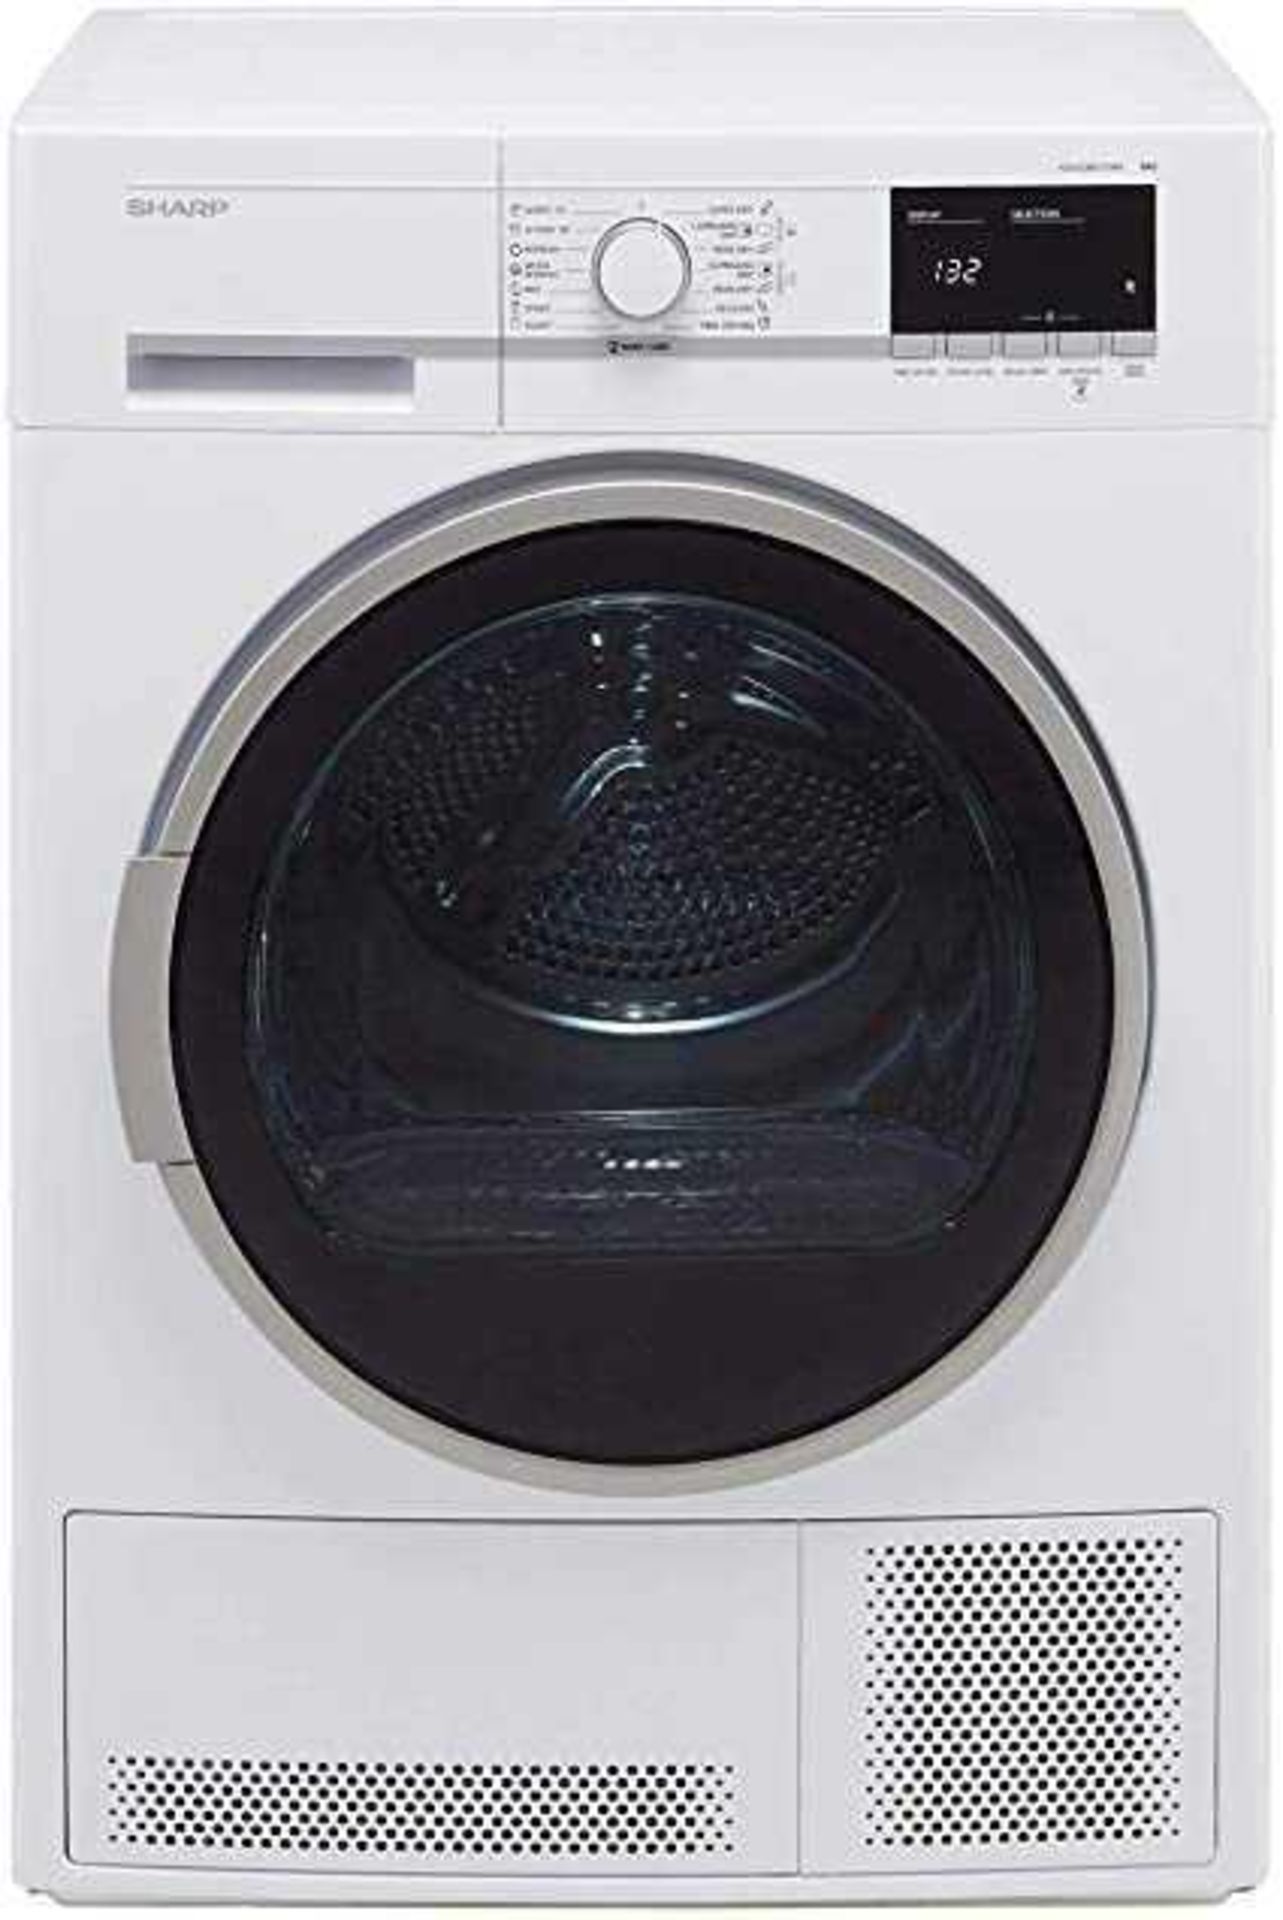 (Sp) RRP £300 Lot To Contain 1 Sharp Kd-Gcb8S7Gw9-En 8Kg Condenser Tumble Dryer - Image 2 of 4